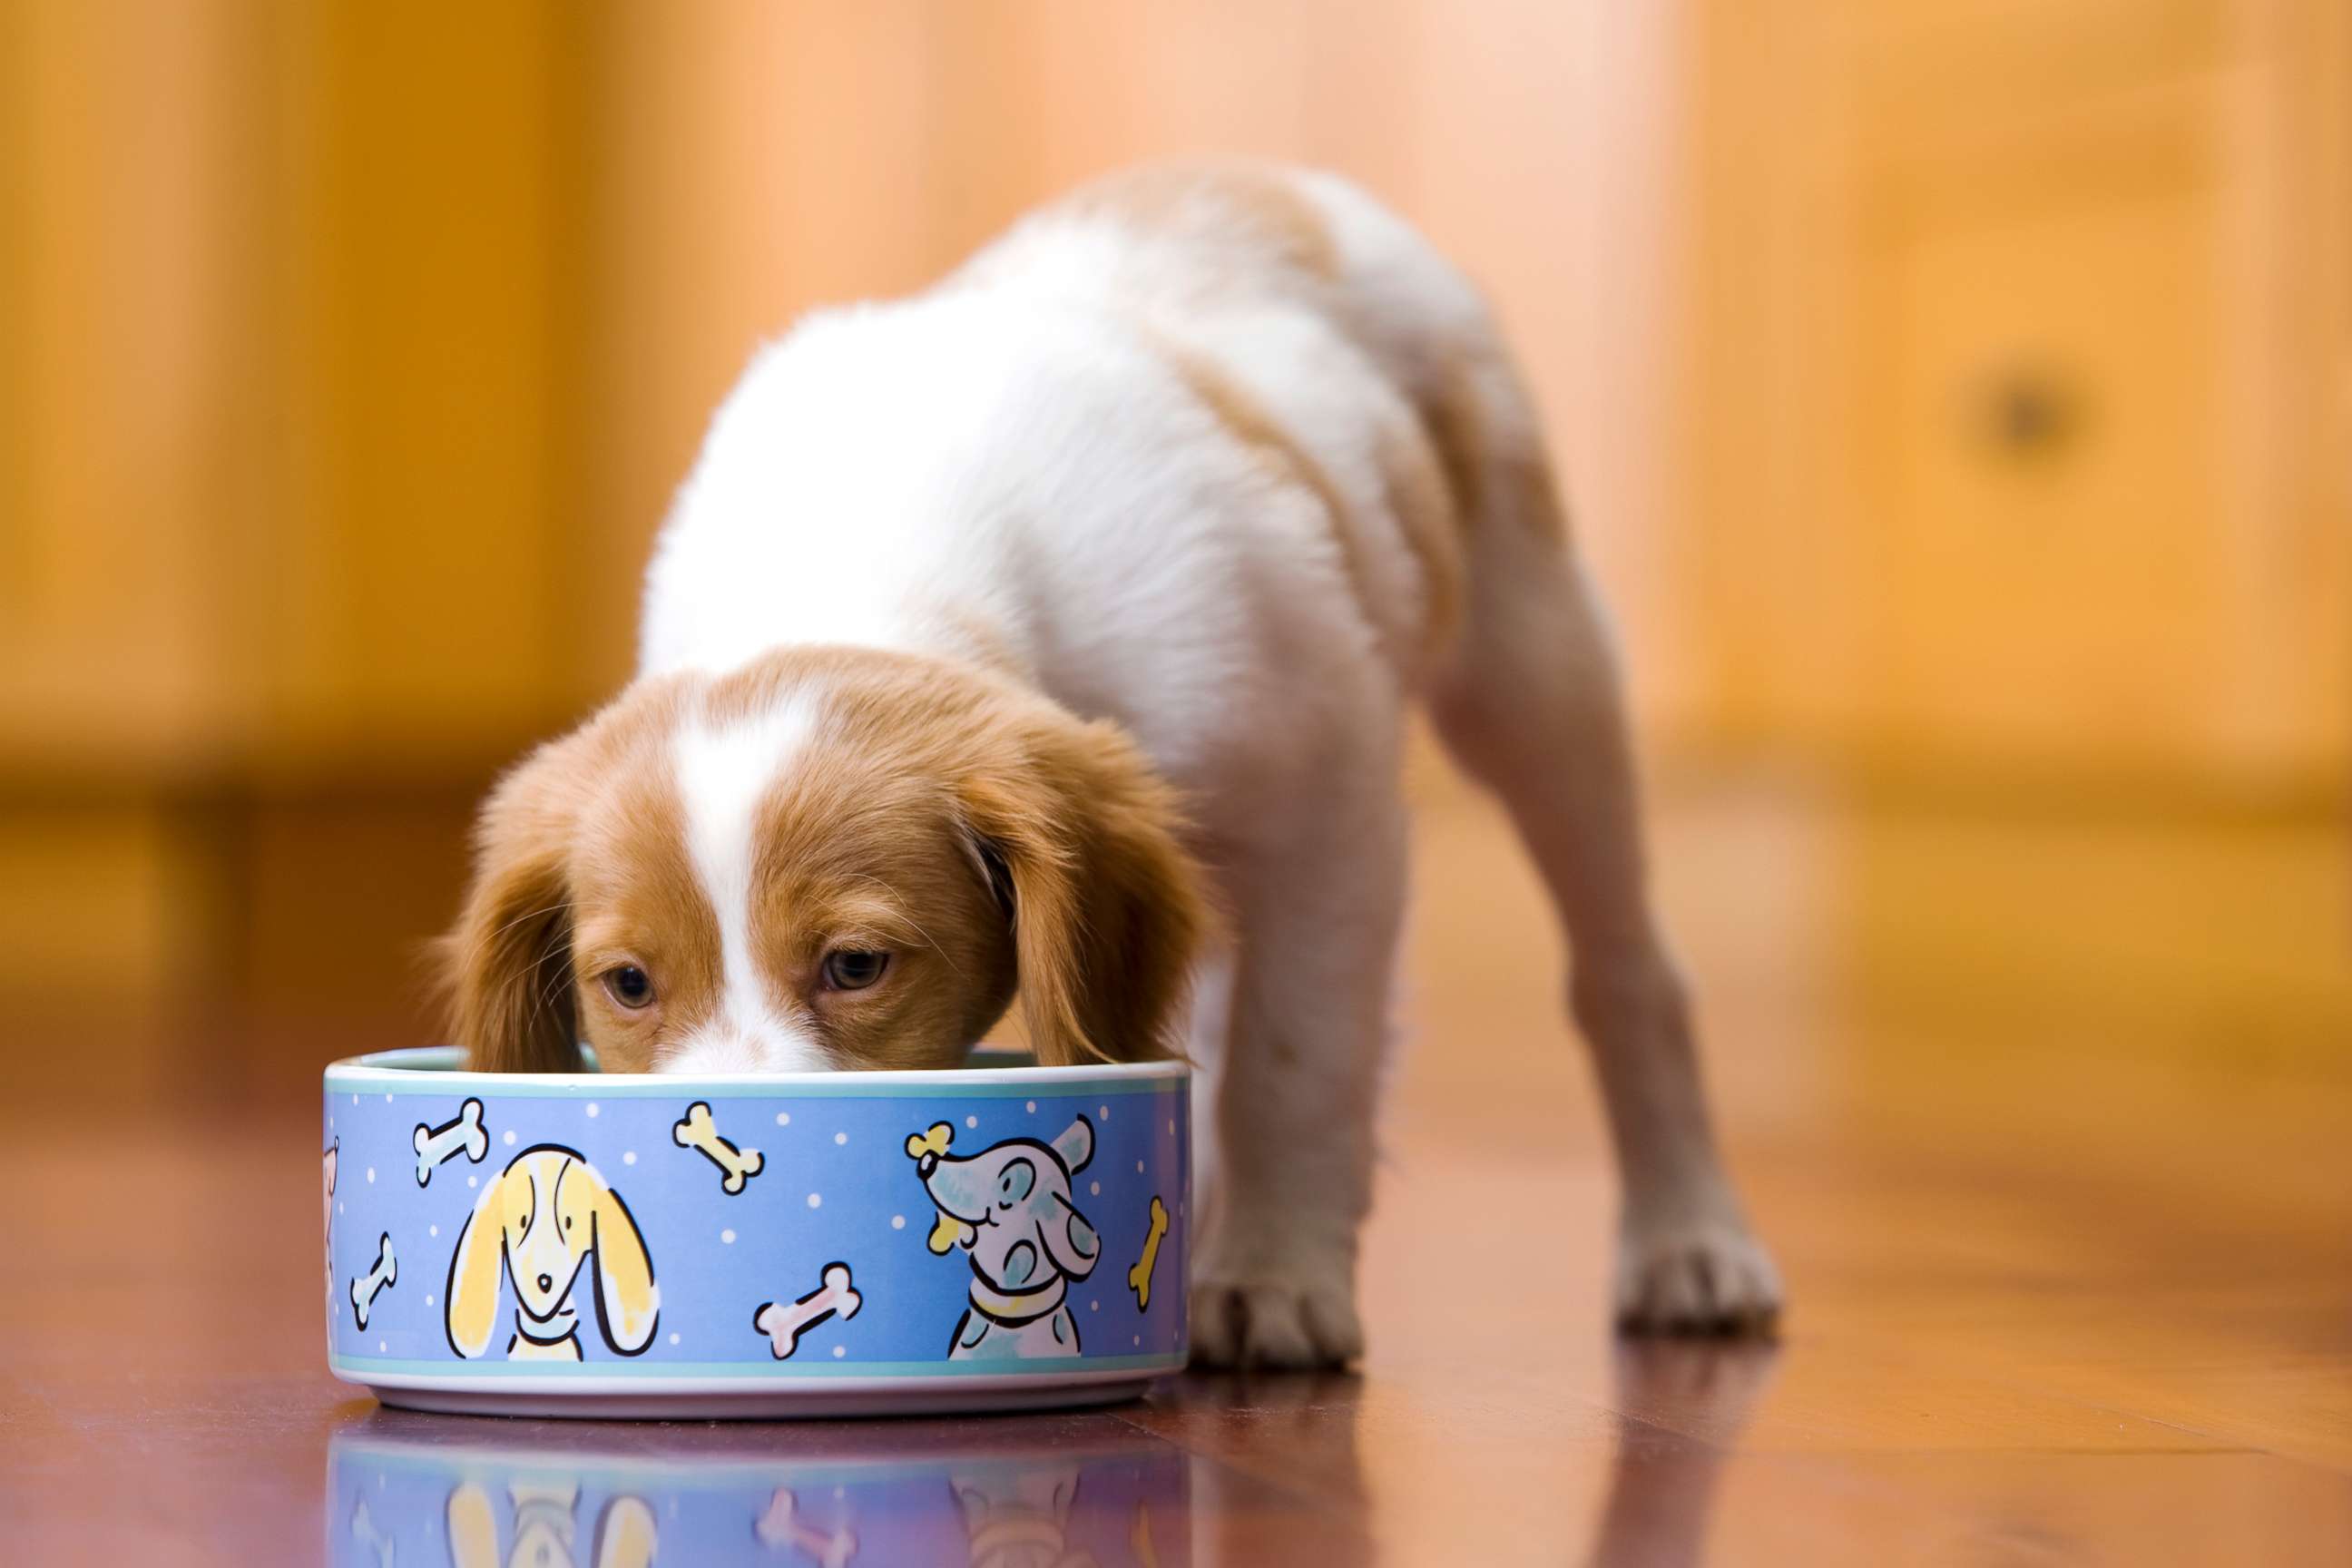 PHOTO: A dog eats in this undated stock photo.